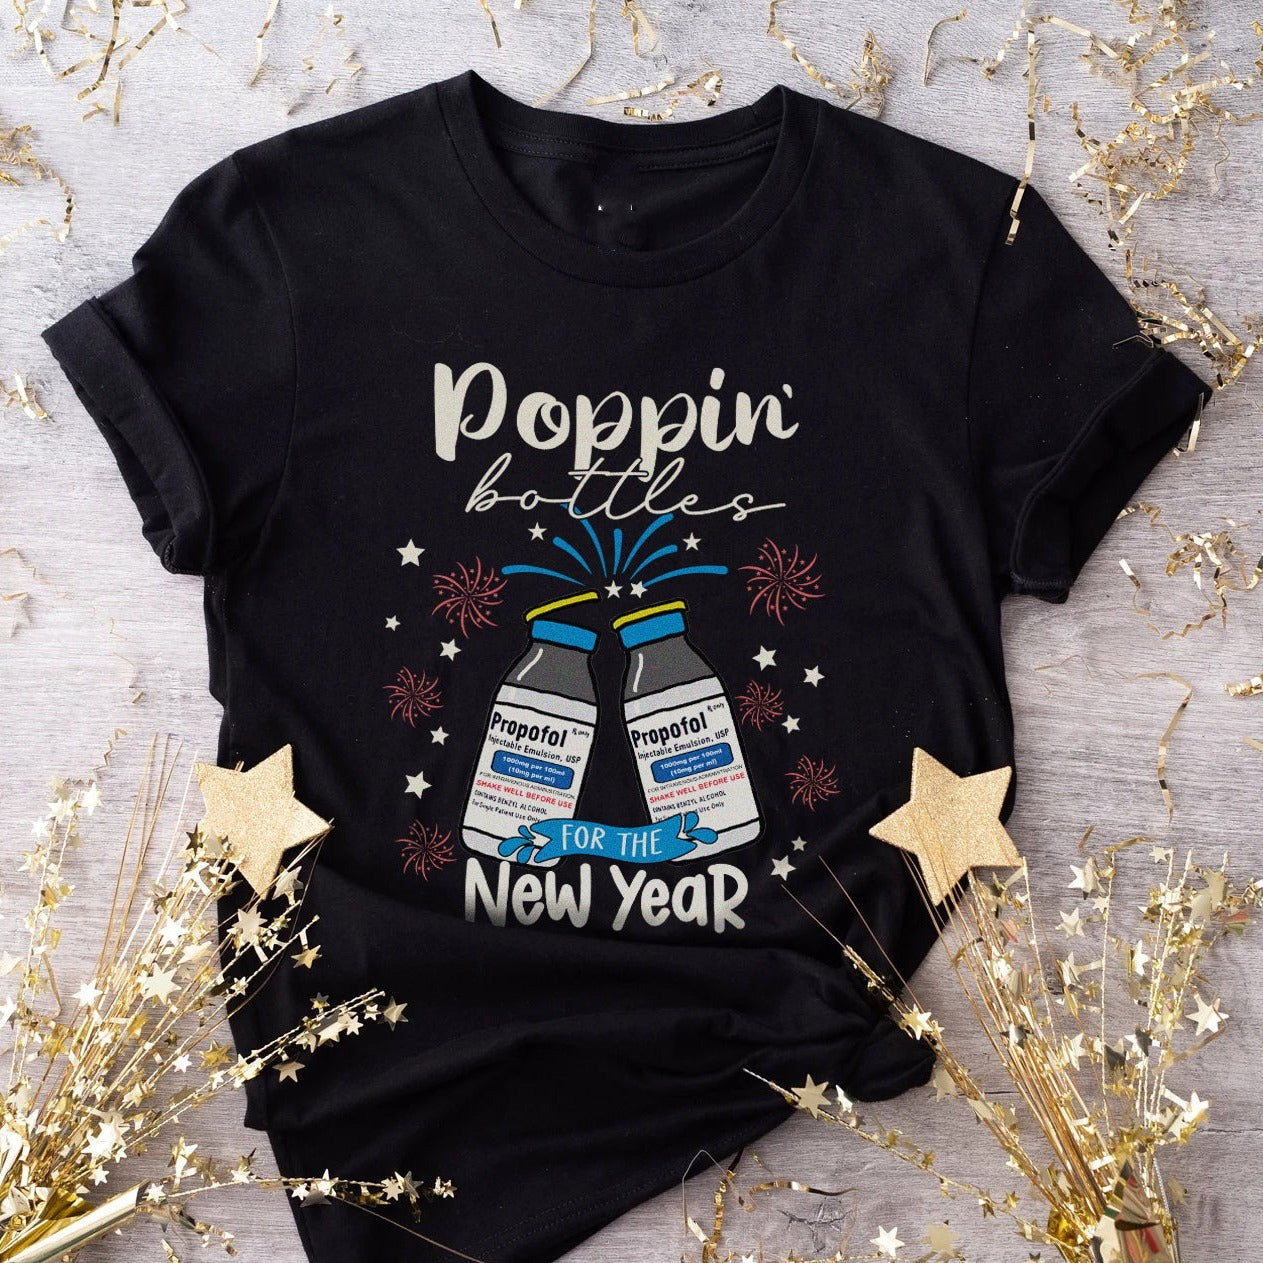 Celebrate in chic style with our Poppin Bottle New Year T-shirt in classic black. Cheers to fashion! image